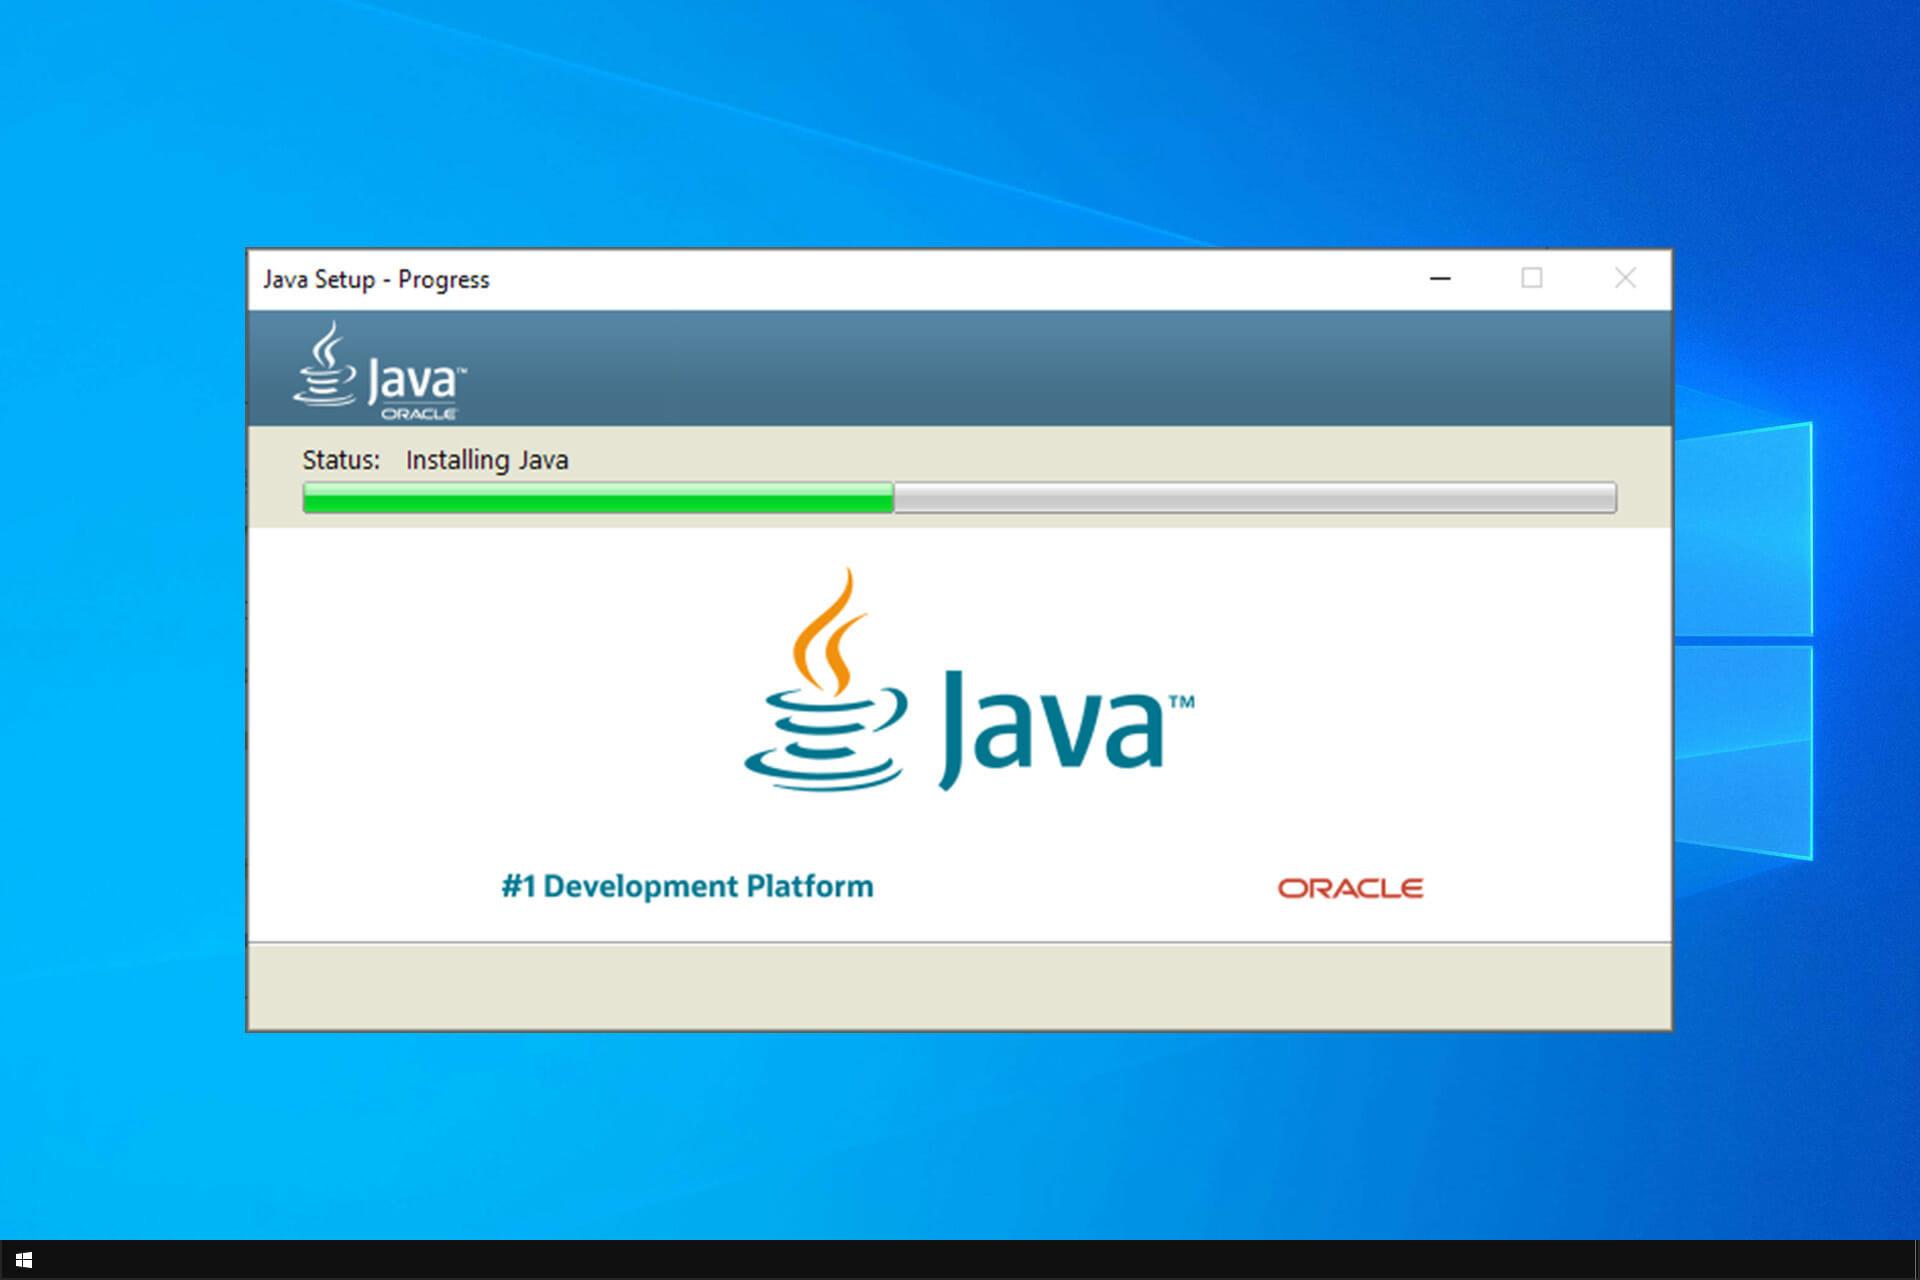 Here's how to download Java on your Windows 20/20 PC